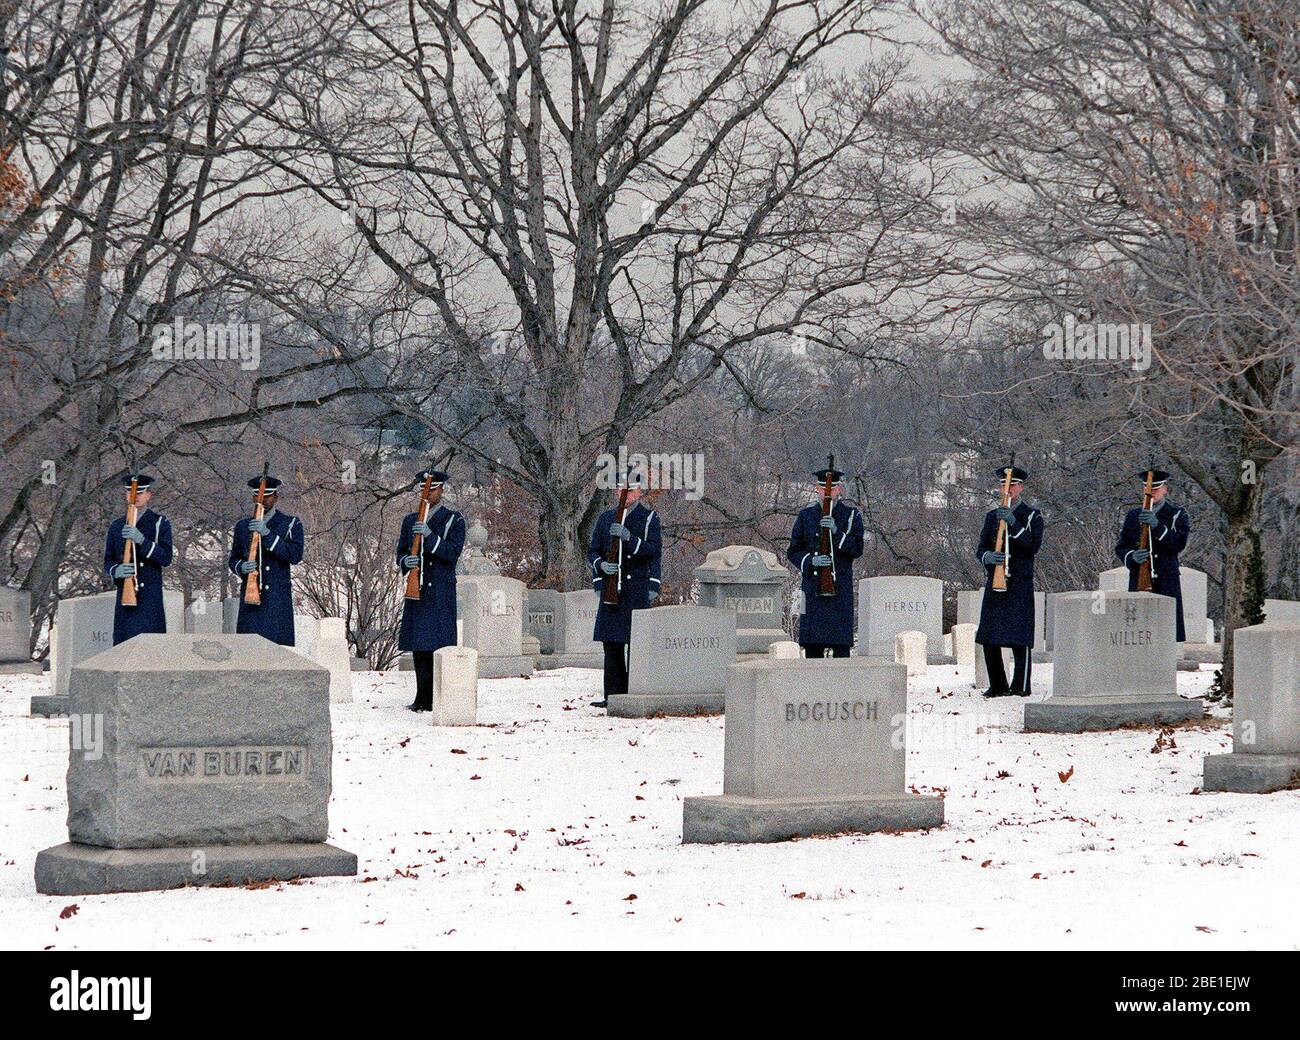 The Air Force Honor Guard fires a 21-gun salute at the conclusion of the graveside funeral service at Arlington National Cemetery. Stock Photo